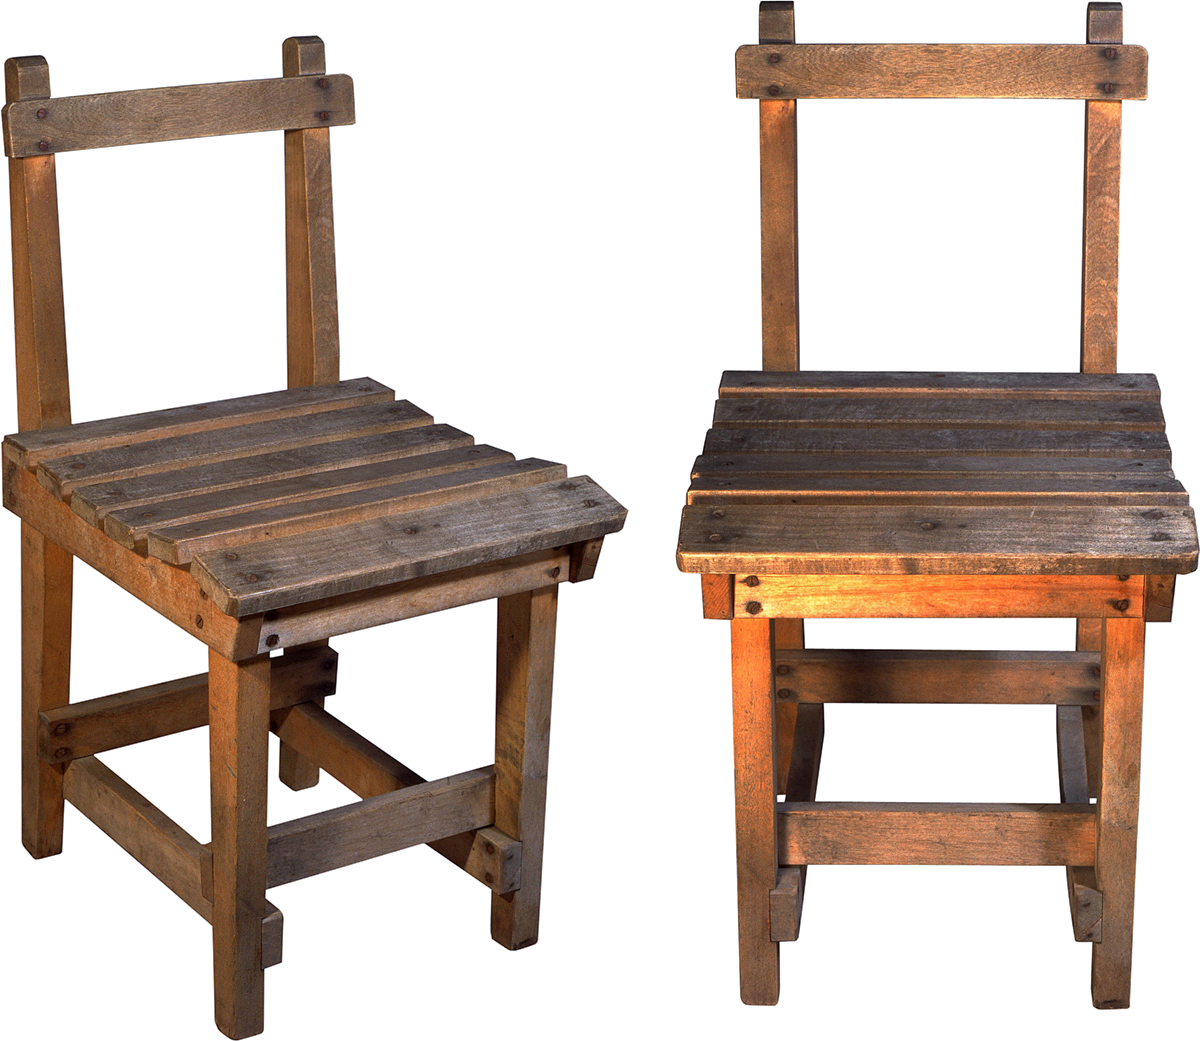 Chair Image Free Transparent Image HD PNG Image